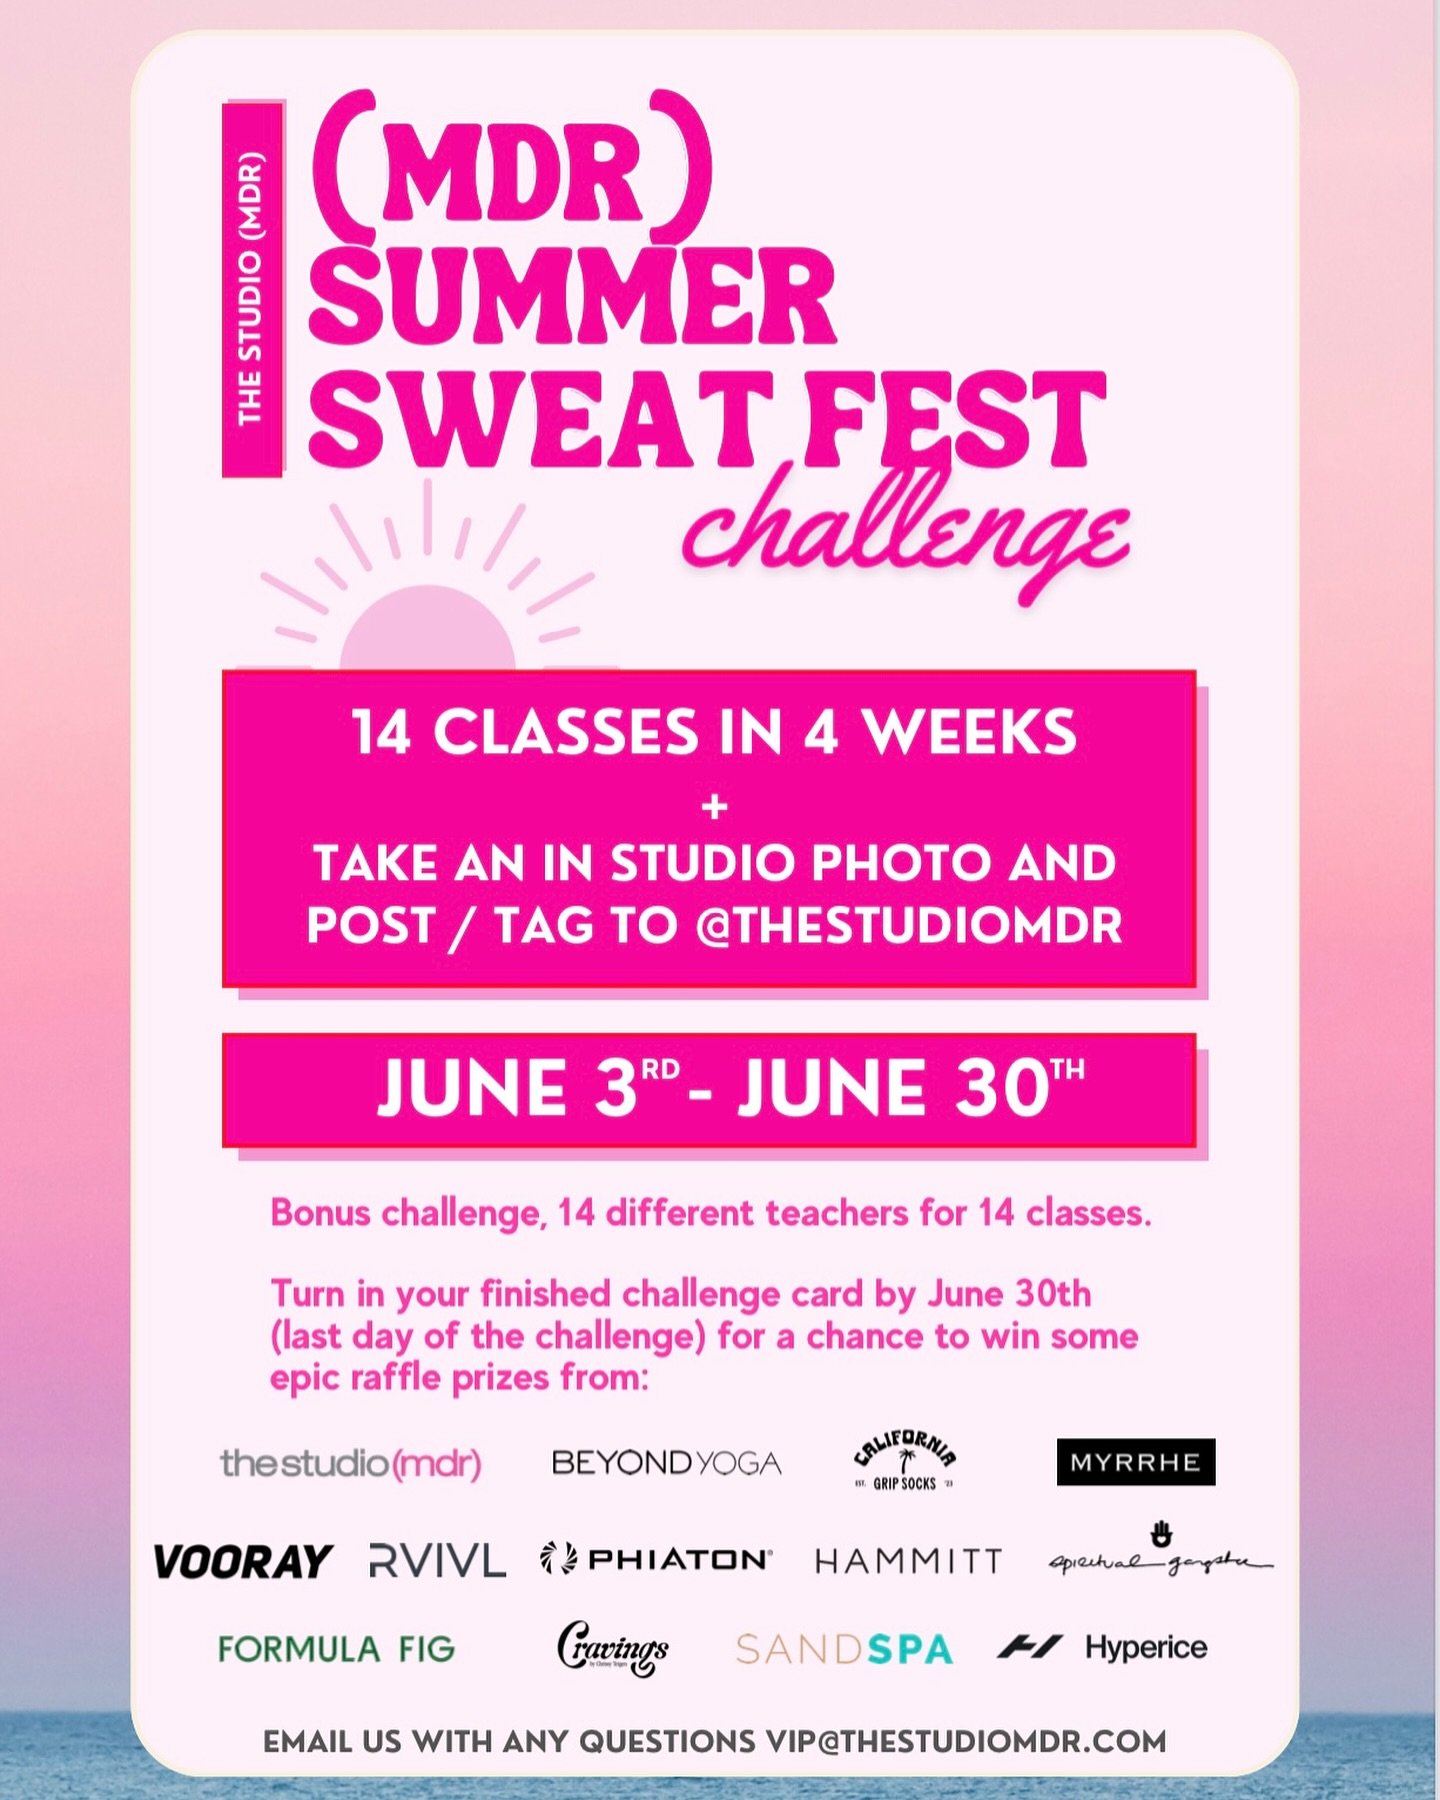 Who&rsquo;s ready for our (MDR) SUMMER SWEAT FEST CHALLENGE starting tomorrow Monday 6/3?! Get your summer started by joining us in taking 14 classes in 4 weeks, taking an in studio photo with an instructor, and turn in your completed card to be ente